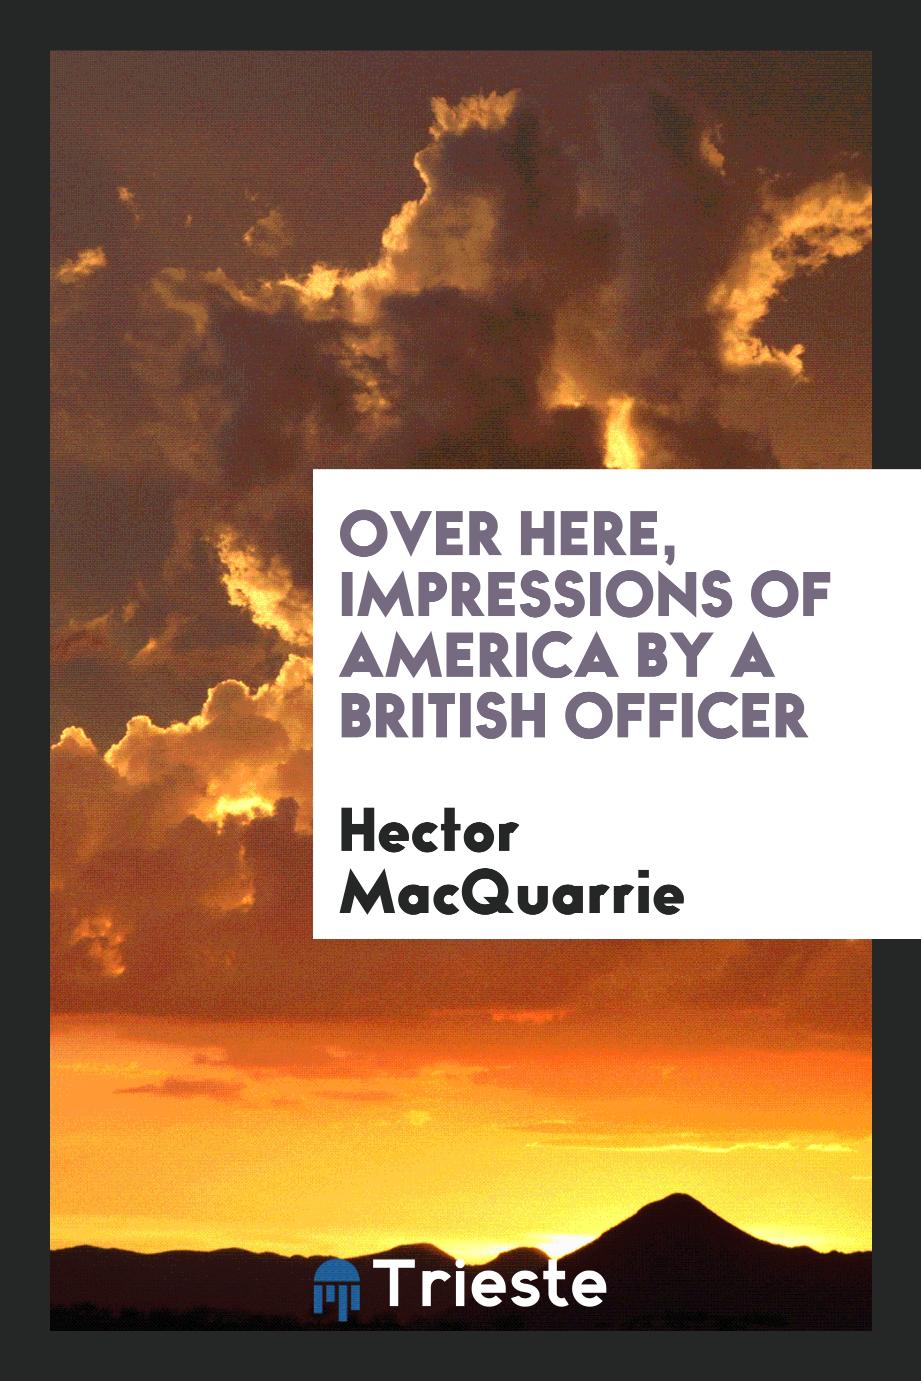 Over here, impressions of America by a British officer